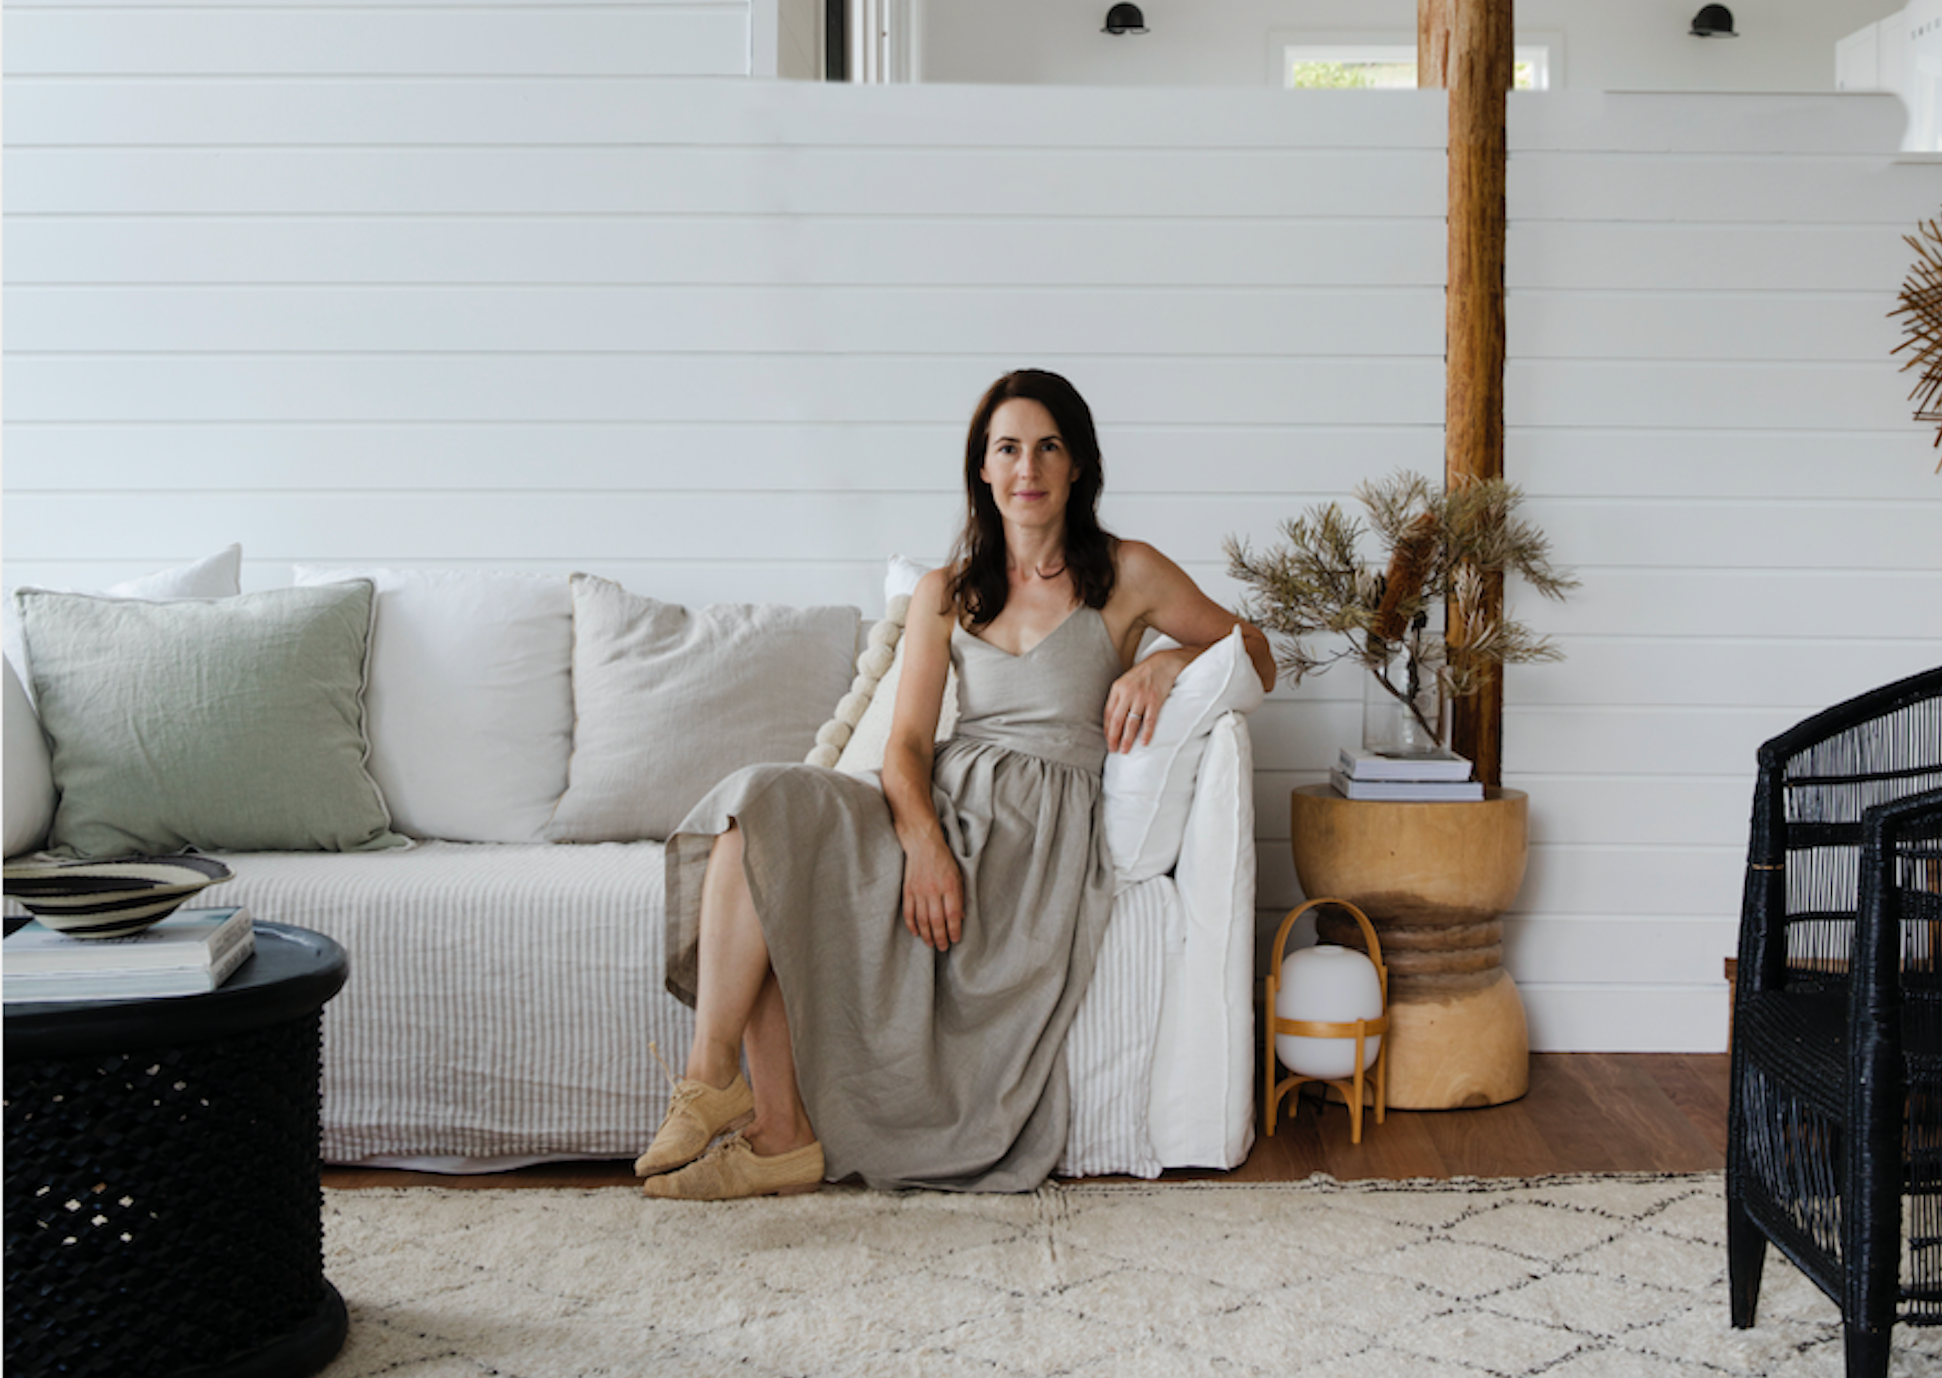 NATALIE WALTON ON CREATING A SLOW AND SUSTAINABLE HOME